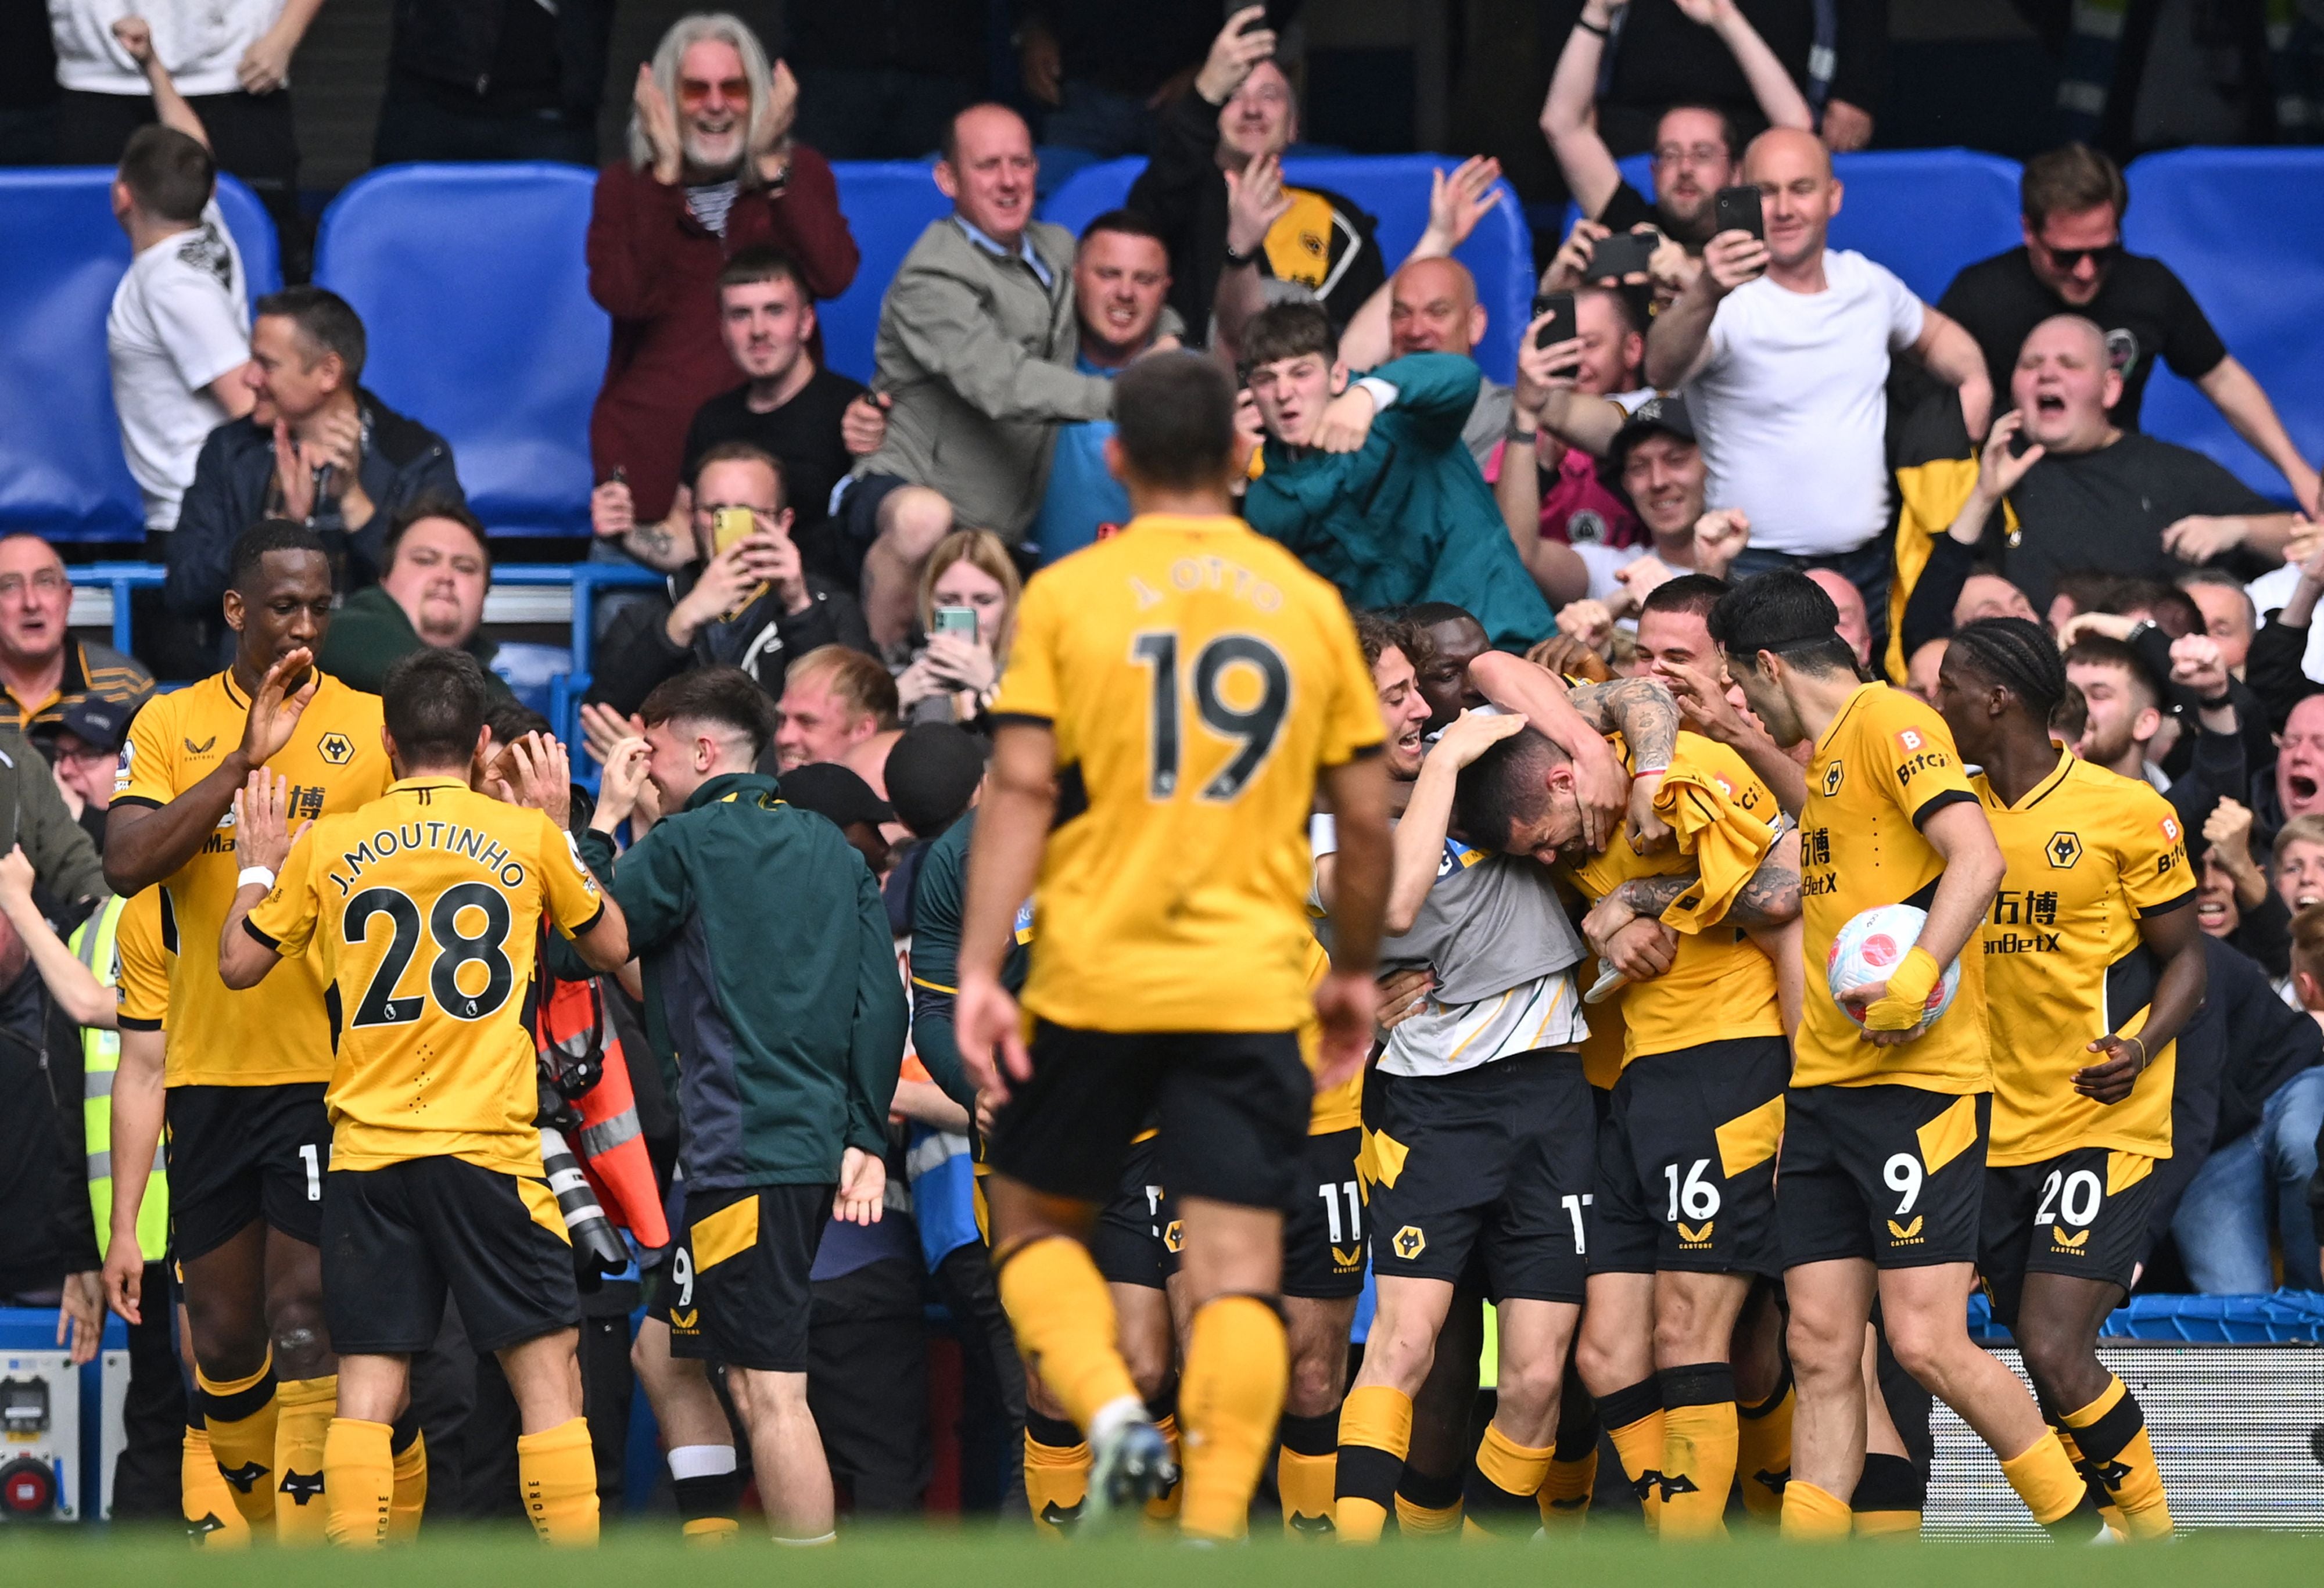 Chelsea are taking on Wolves at Stamford Bridge